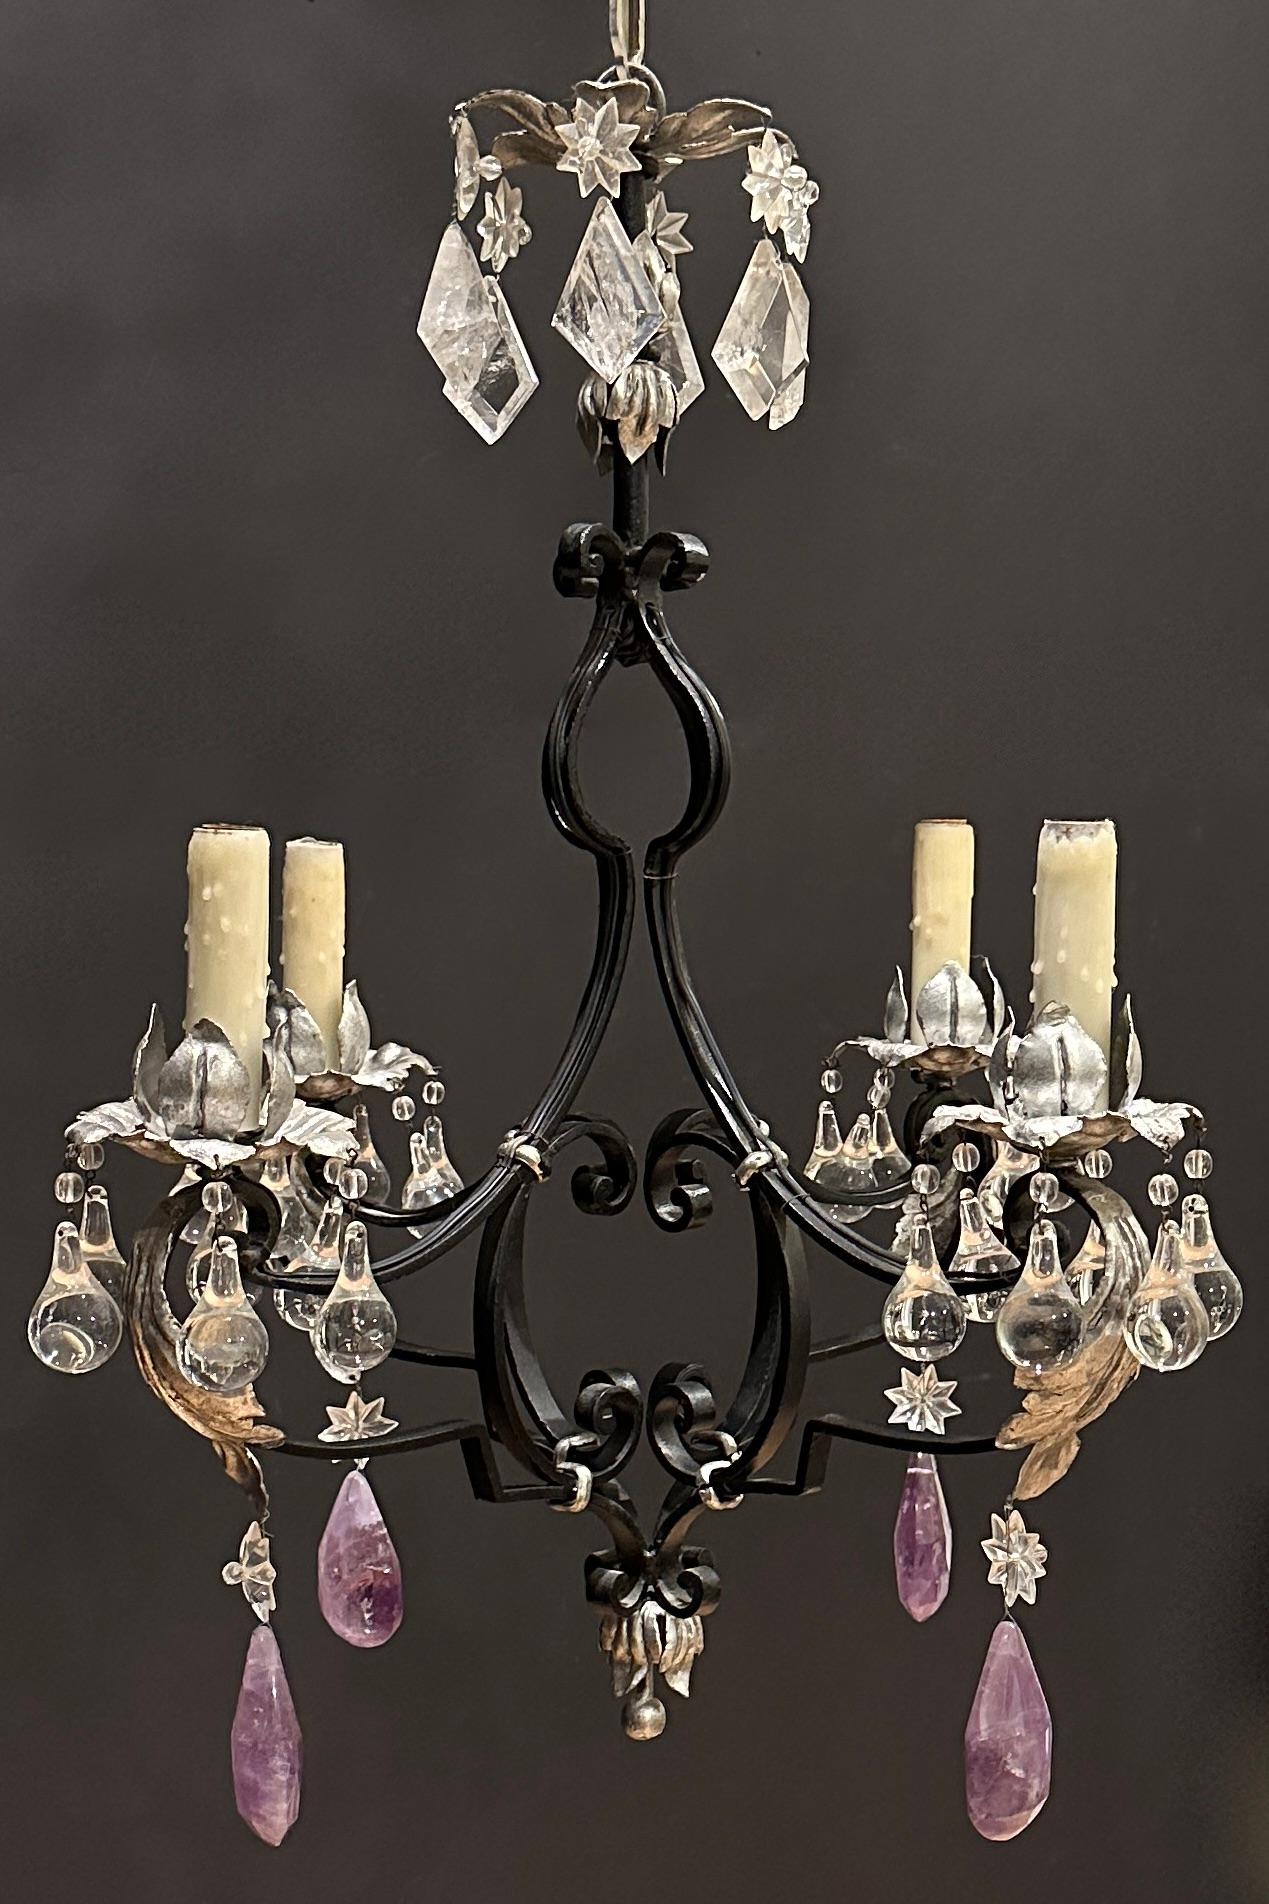 Amethyst and clear rock crystal chandelier featuring a black and silver gilt wrought iron frame in The Louis XV style in The Manner Of Maison Bagues chandelier. Flat hammered arms with scrolls bound to form an elegant Versailles style frame and leaf